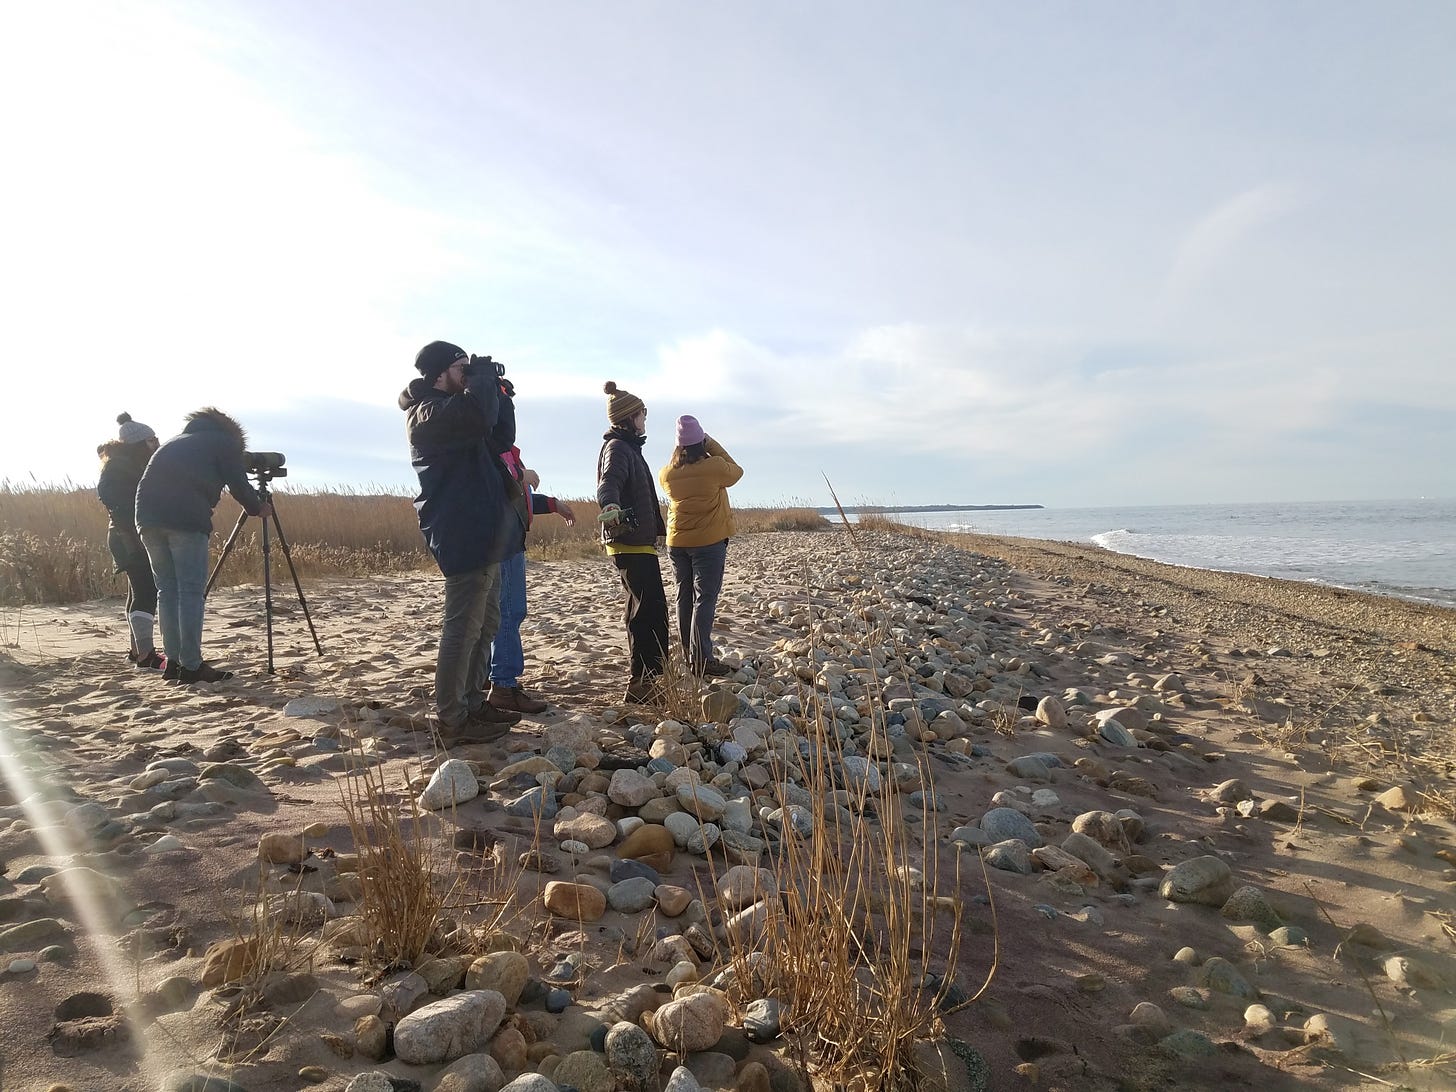 six people in winter cloths looking out at the ocean on a cobblestone beach.